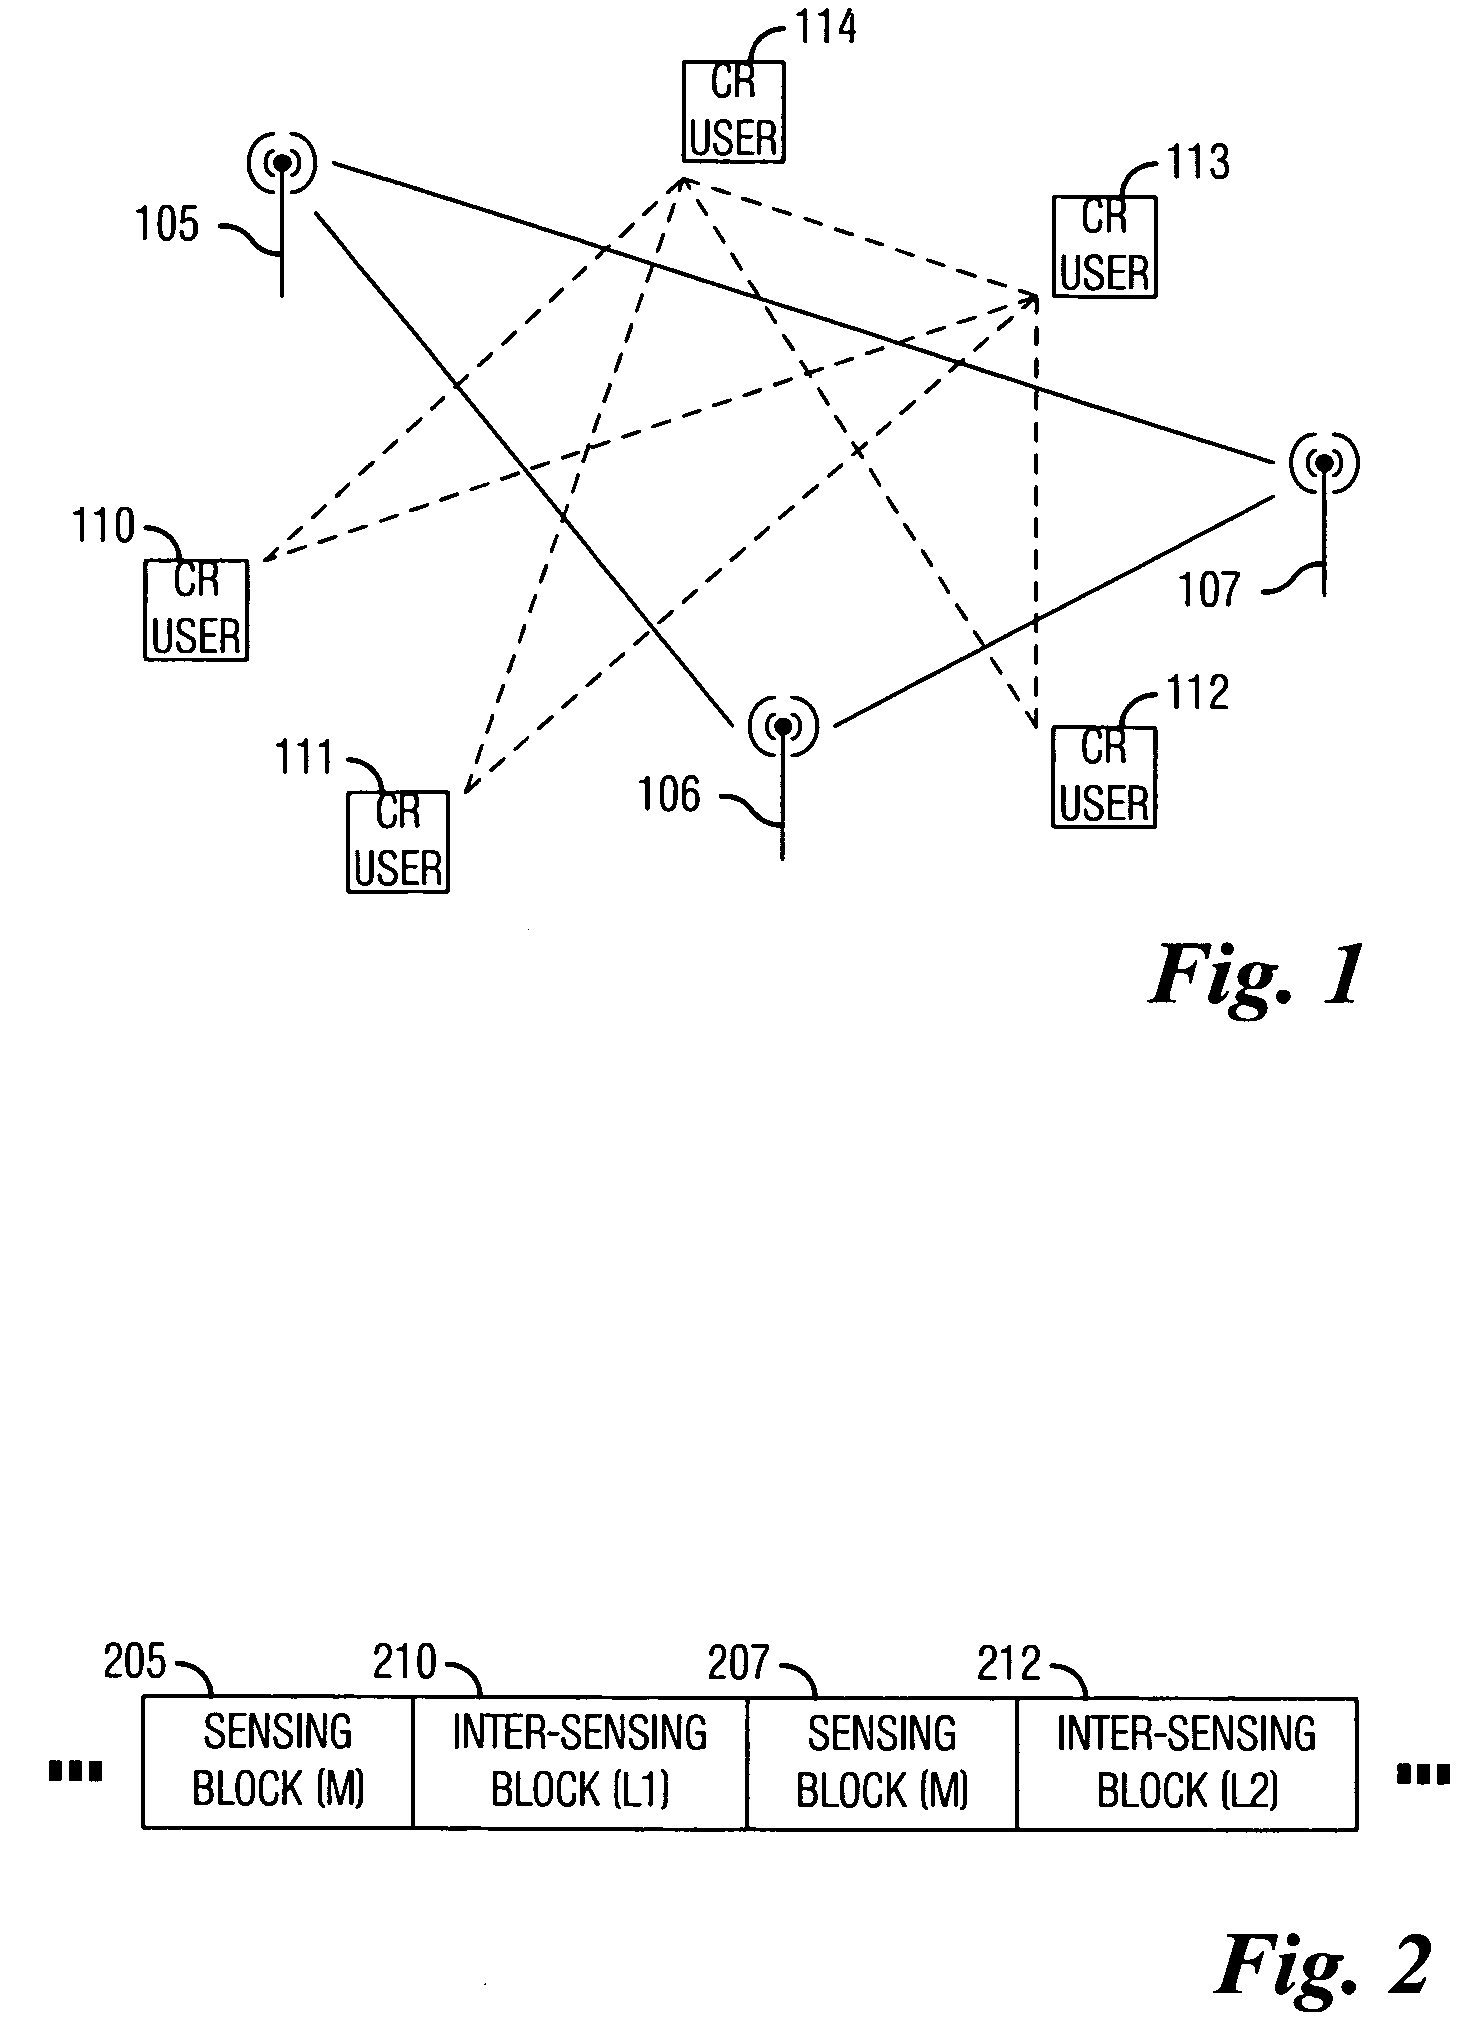 System and Method for Scheduling of Spectrum Sensing in Cognitive Radio Systems